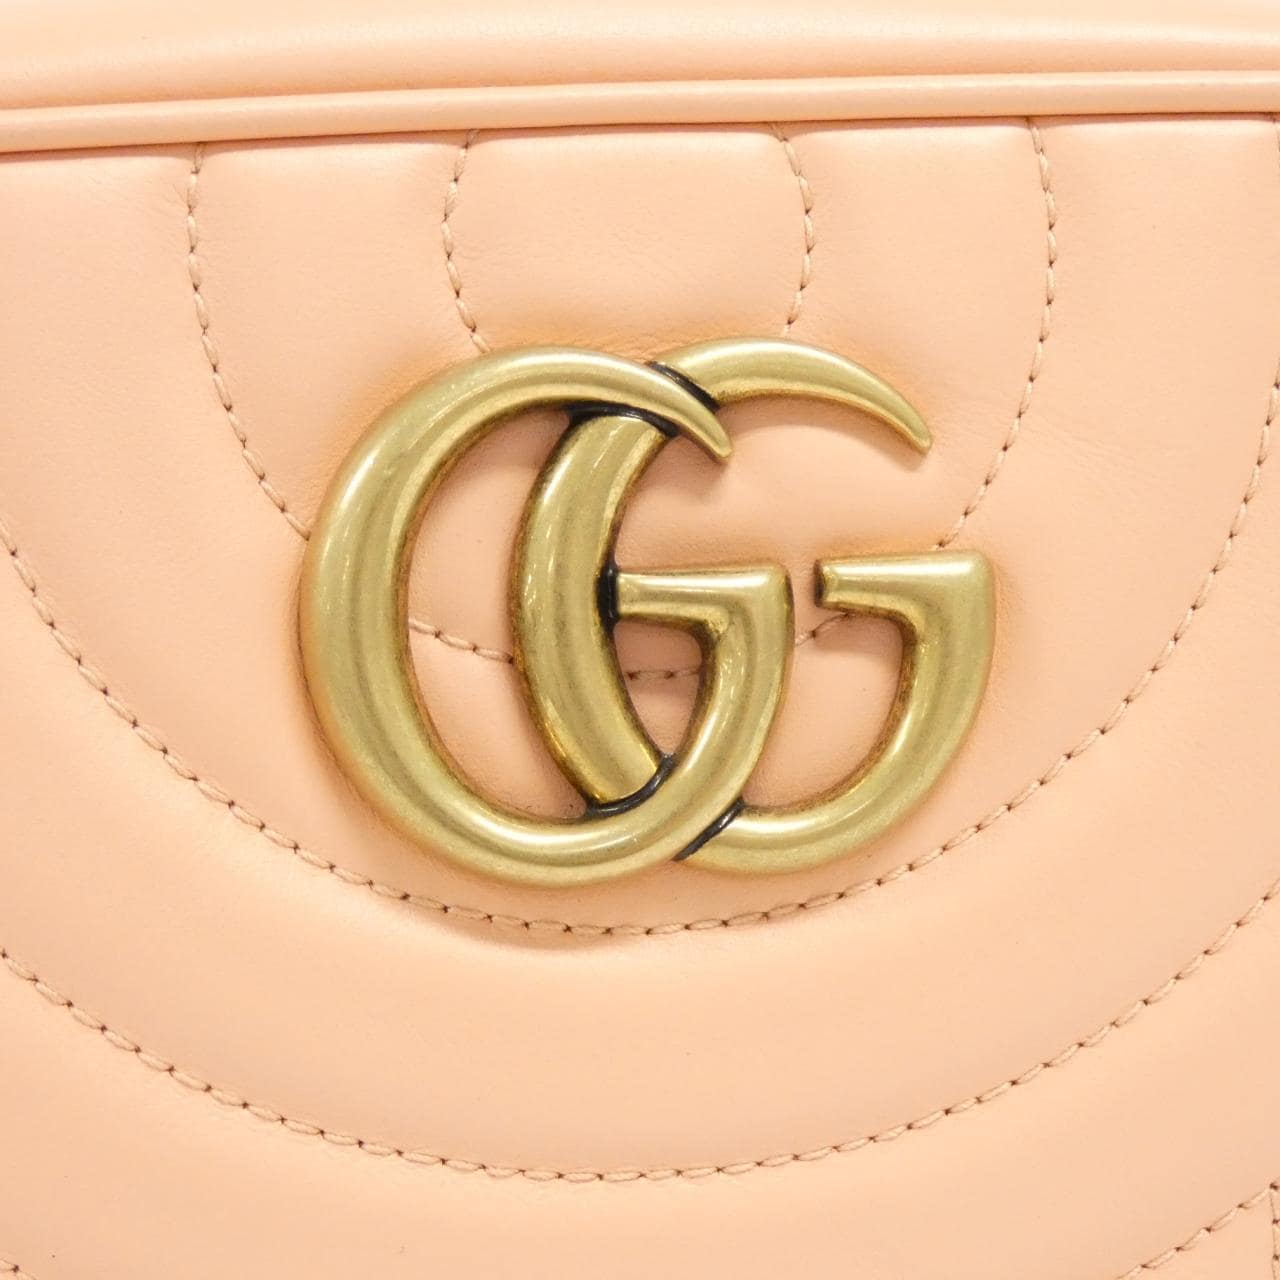 [BRAND NEW] Gucci GG MARMONT 447632 AABZE Shoulder Bag